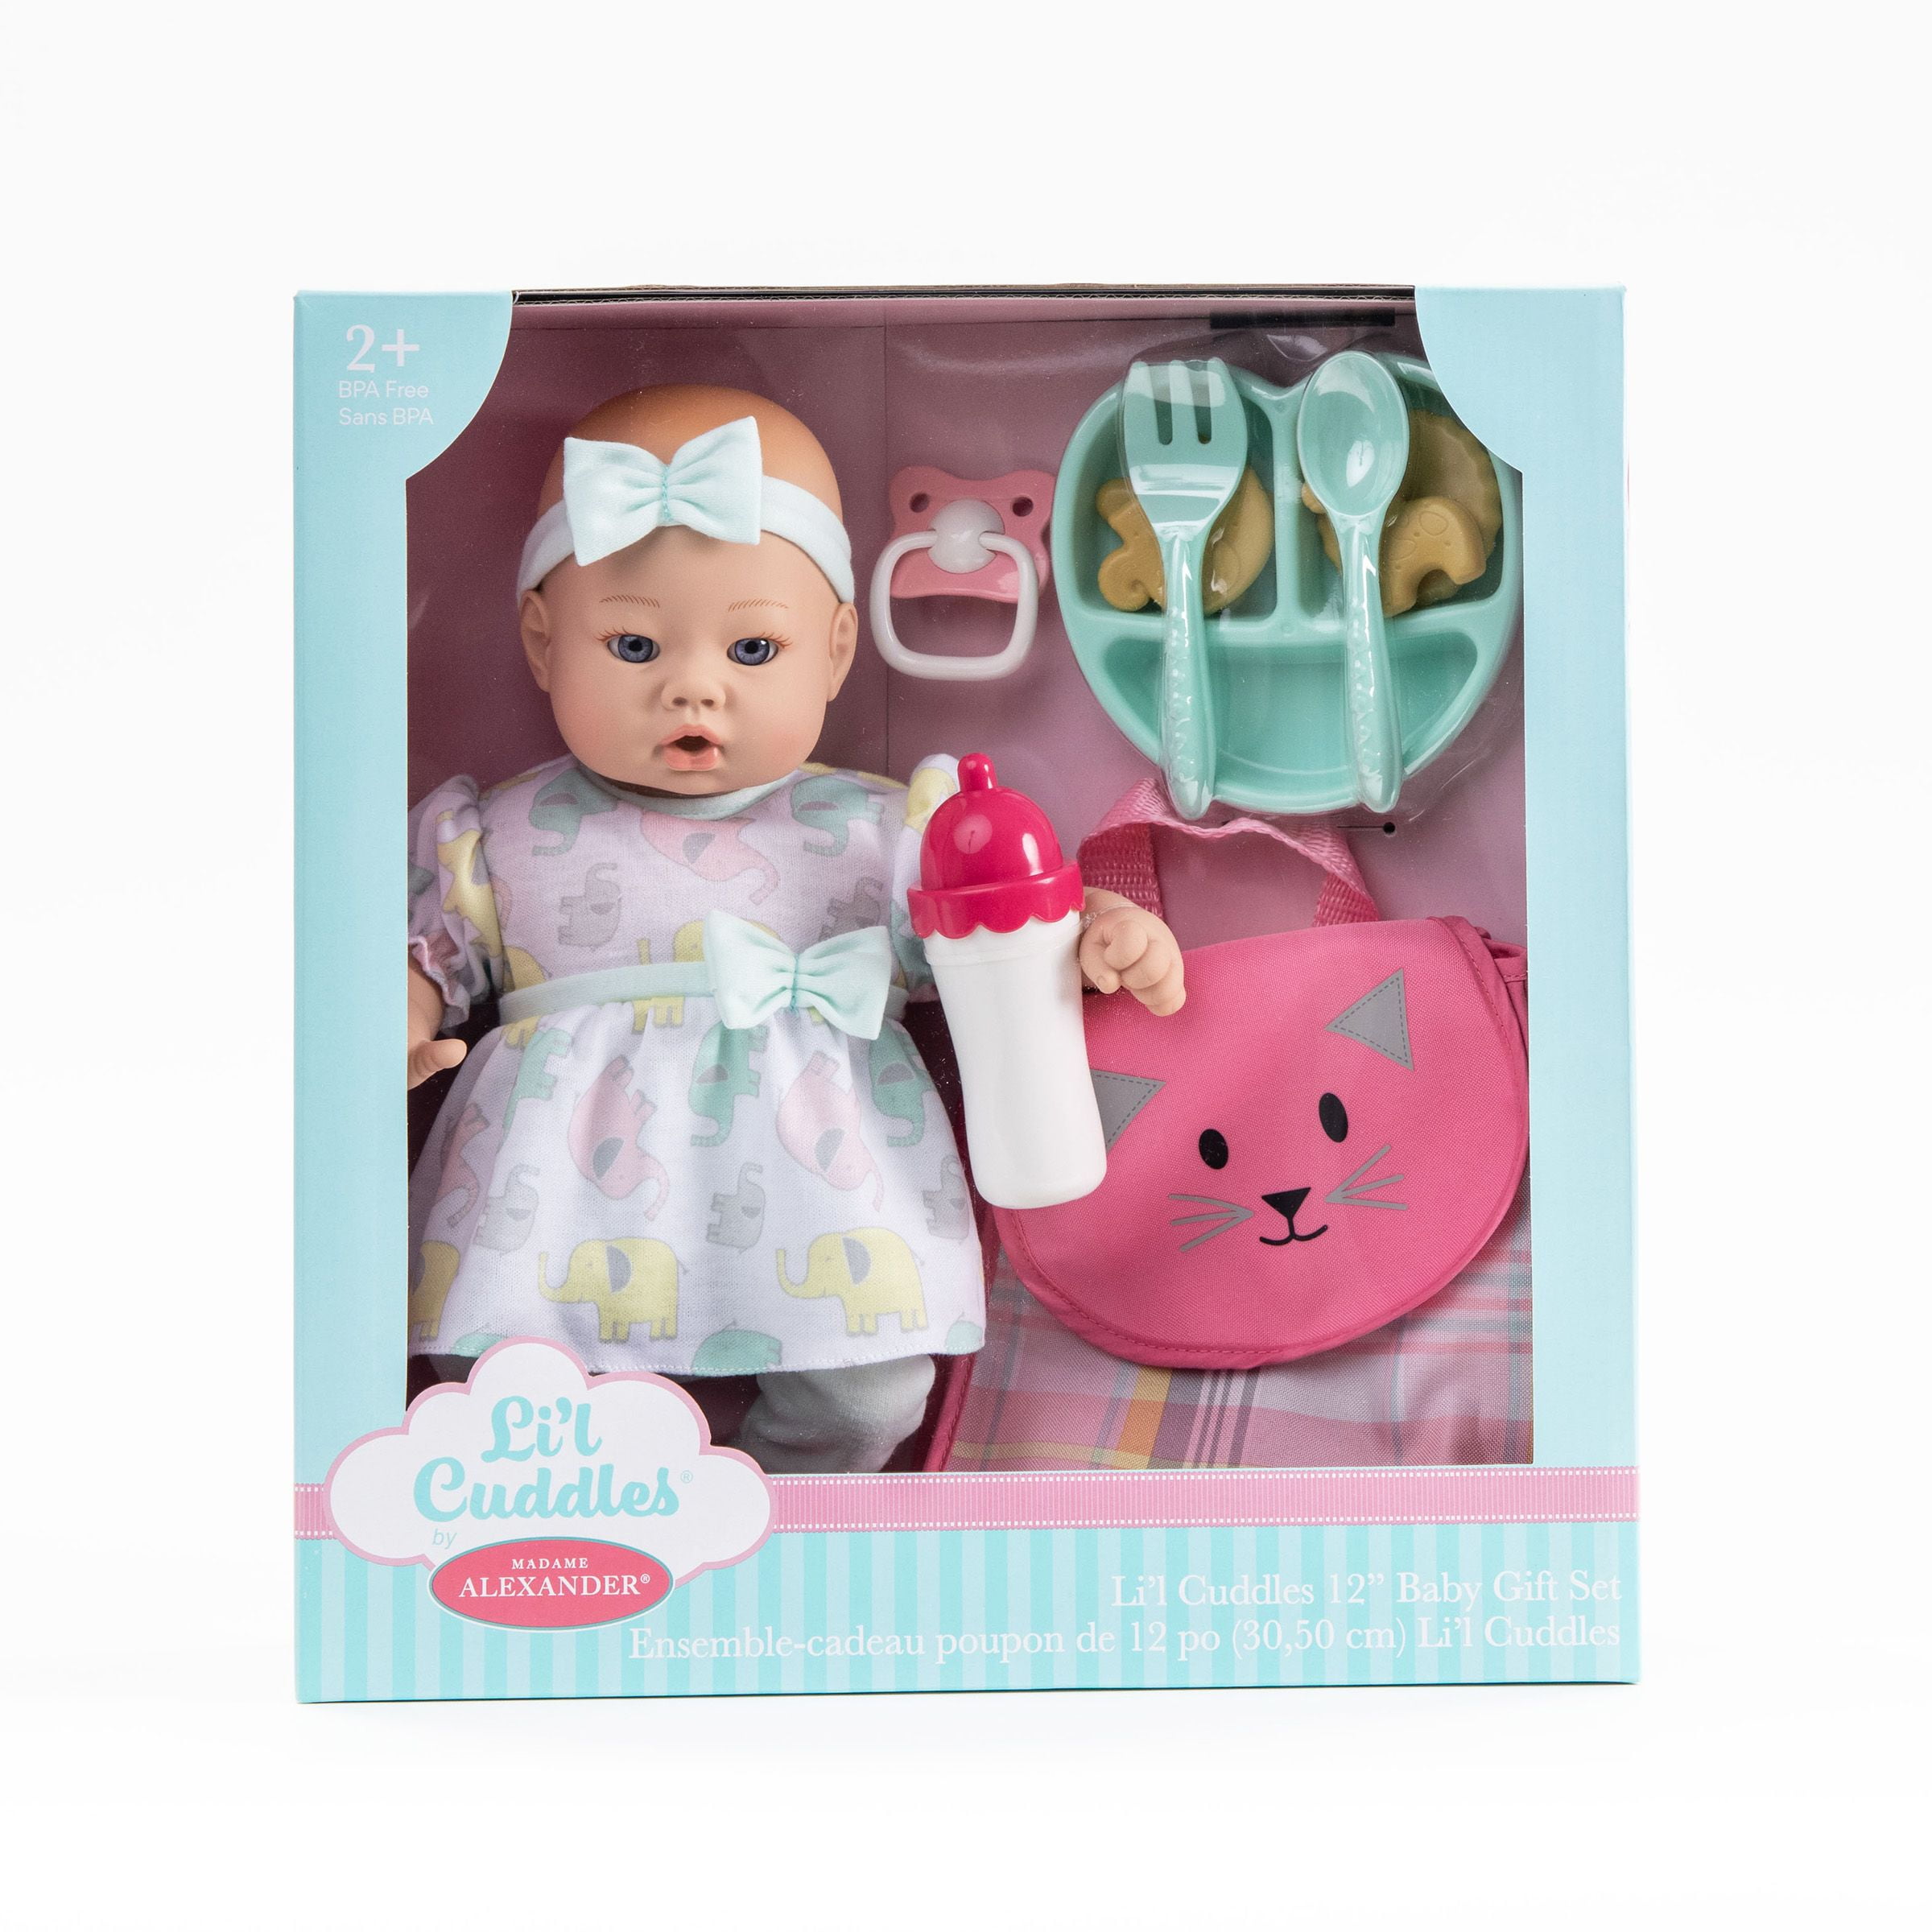 in-1 16 Pieces Baby Doll Role Play Set deAO Kids Deluxe 4 Doll Not Included 